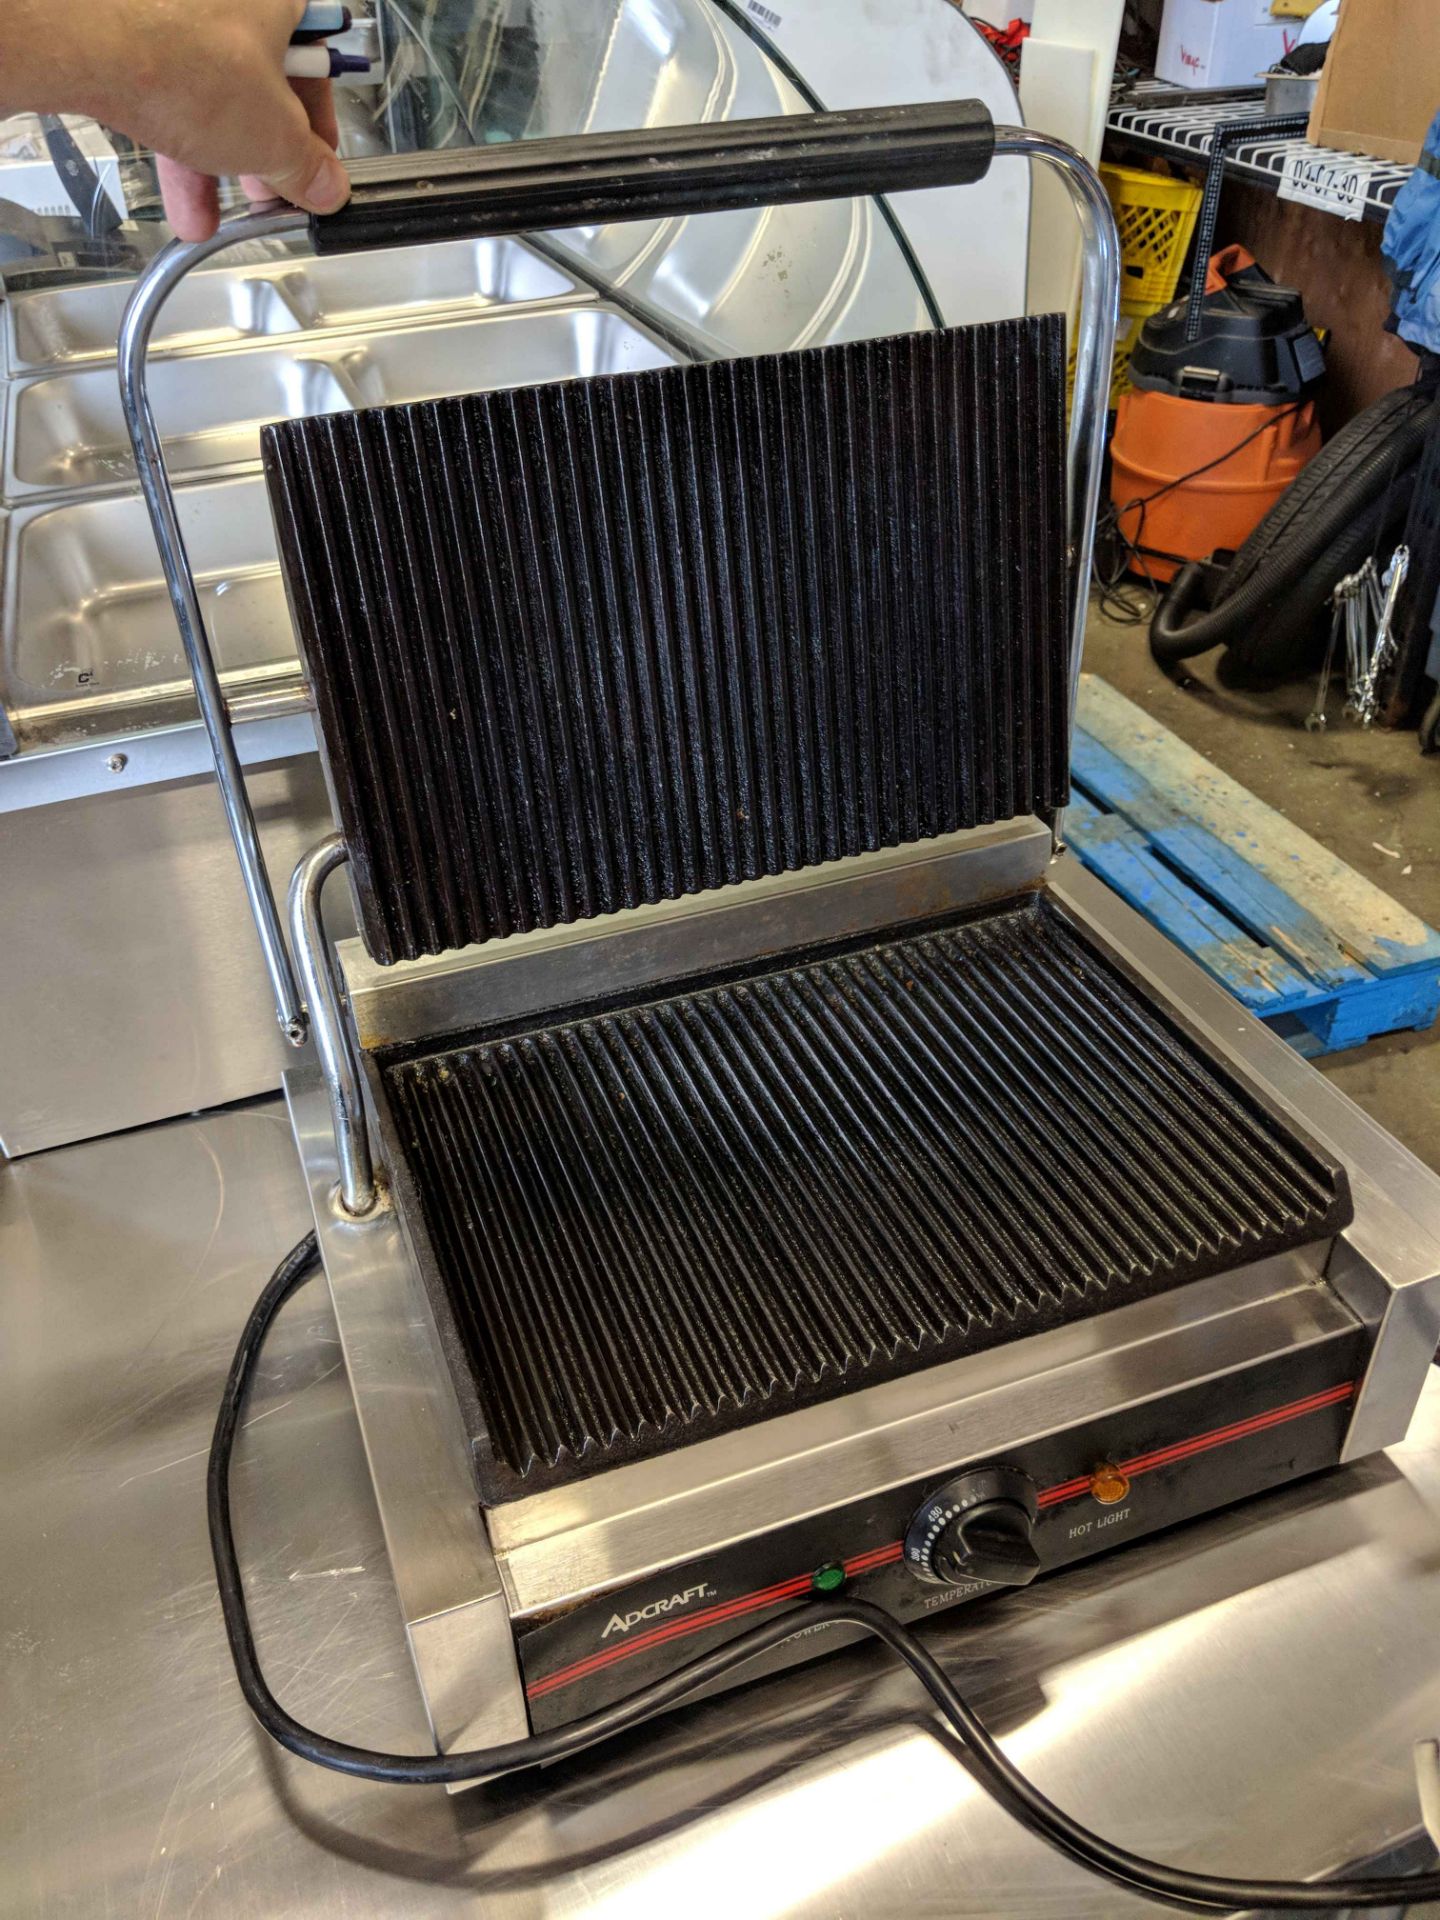 (Only Reaches 180F) Adcraft Panini Grill - Image 2 of 2